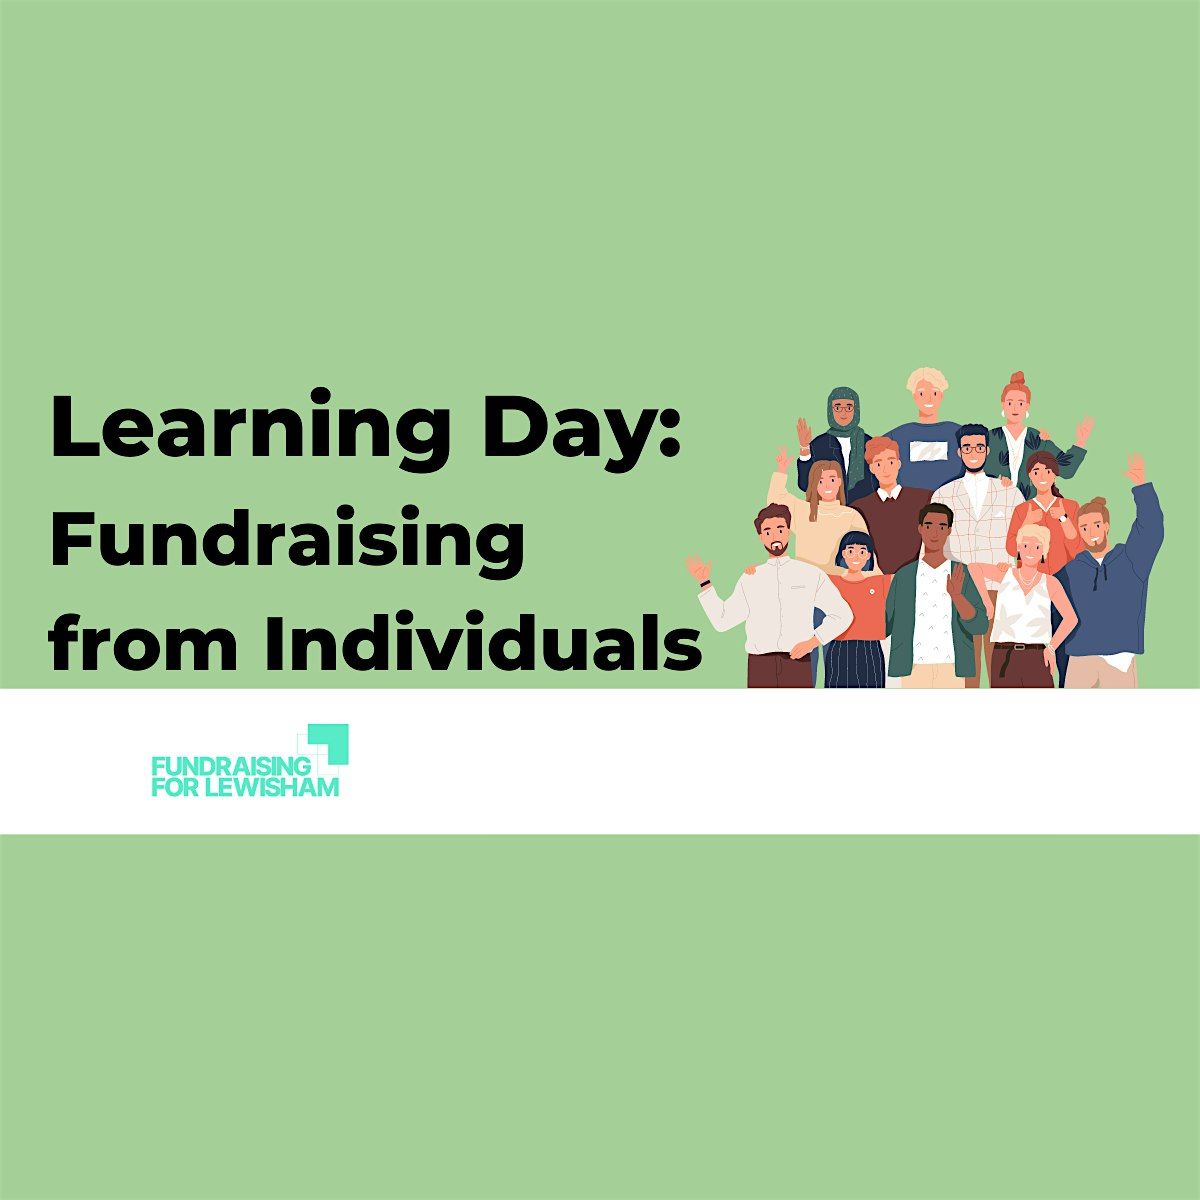 Learning Day: Fundraising from Individuals